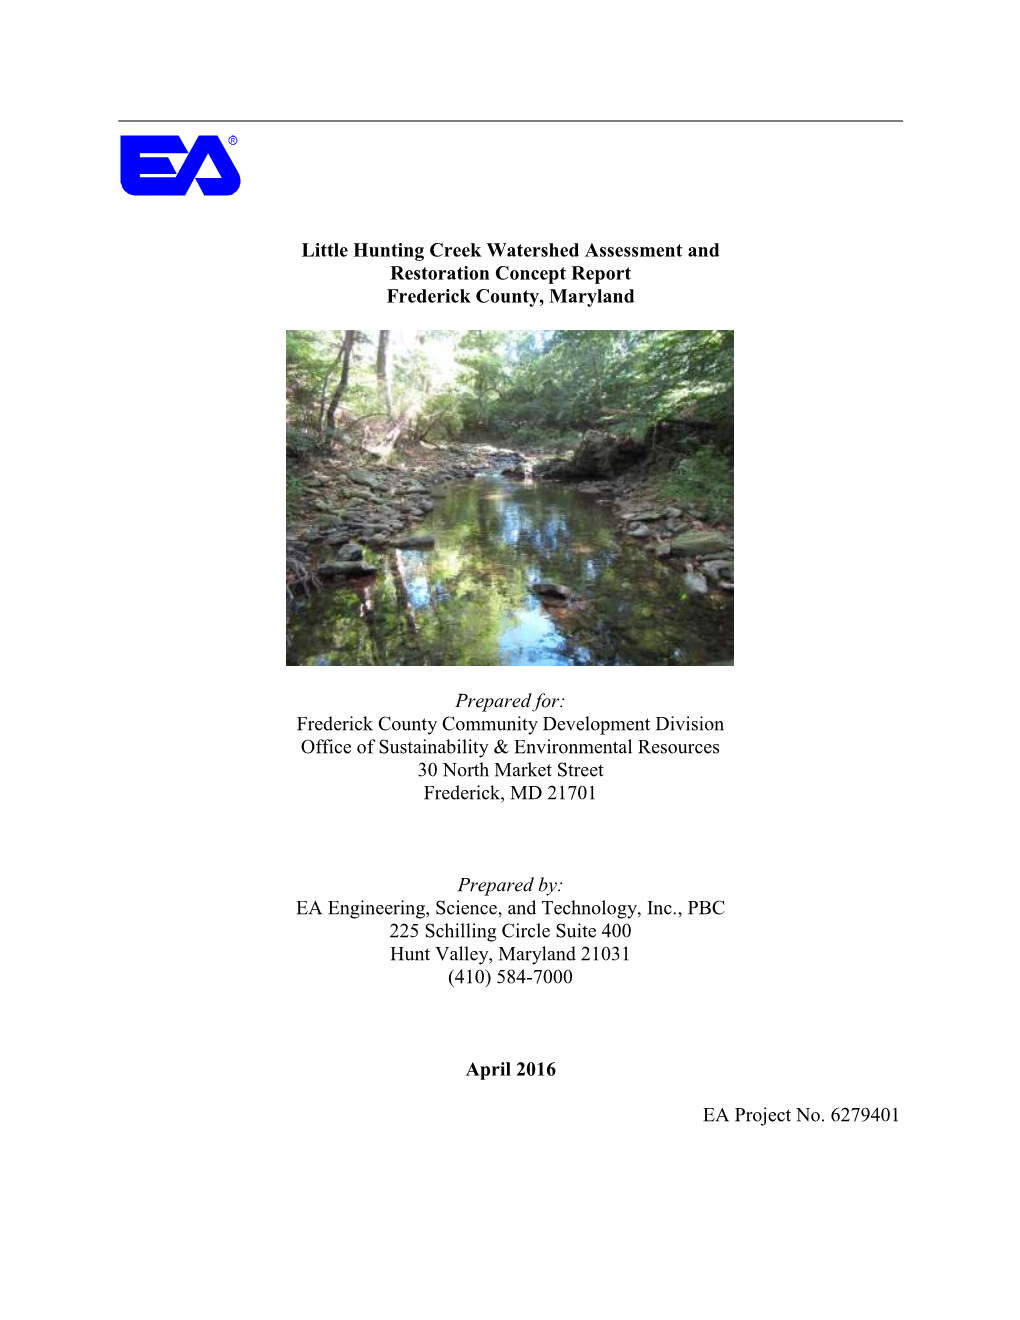 Little Hunting Creek Watershed Assessment and Restoration Concept Report Frederick County, Maryland